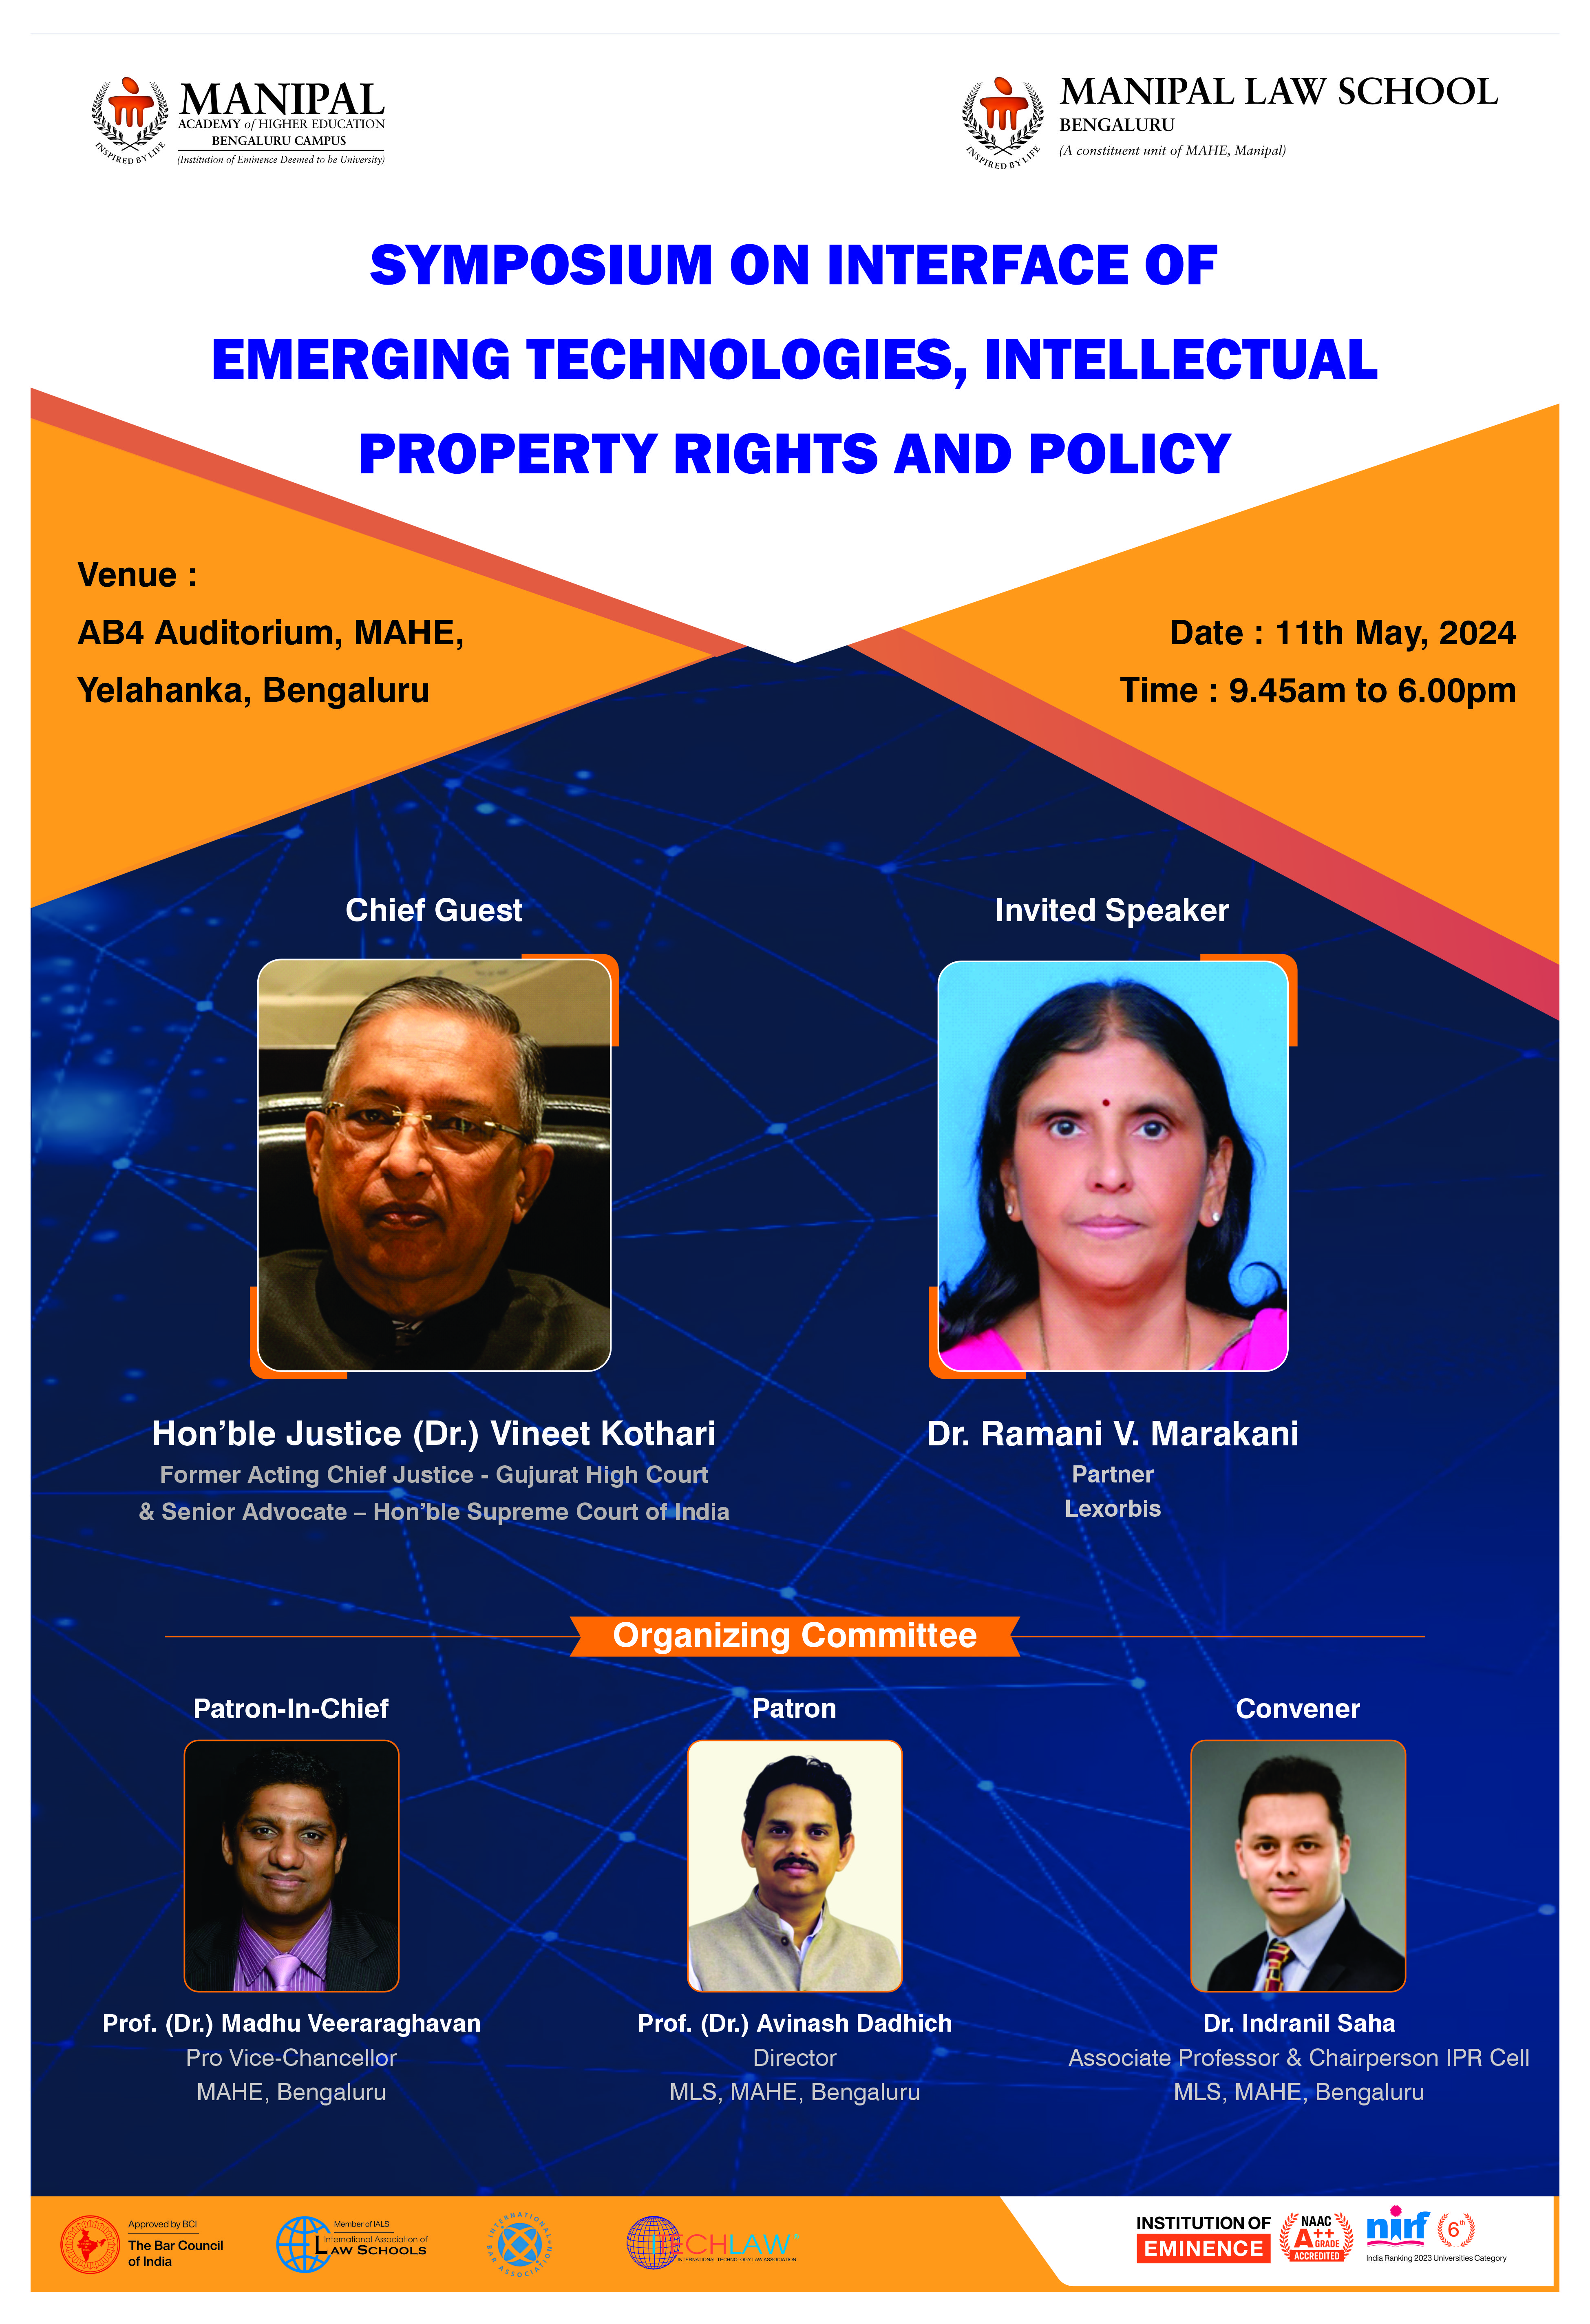 SYMPOSIUM ON INTERFACE OF EMERGING TECHNOLOGIES, INTELLECTUAL PROPERTY RIGHTS AND POLICY 